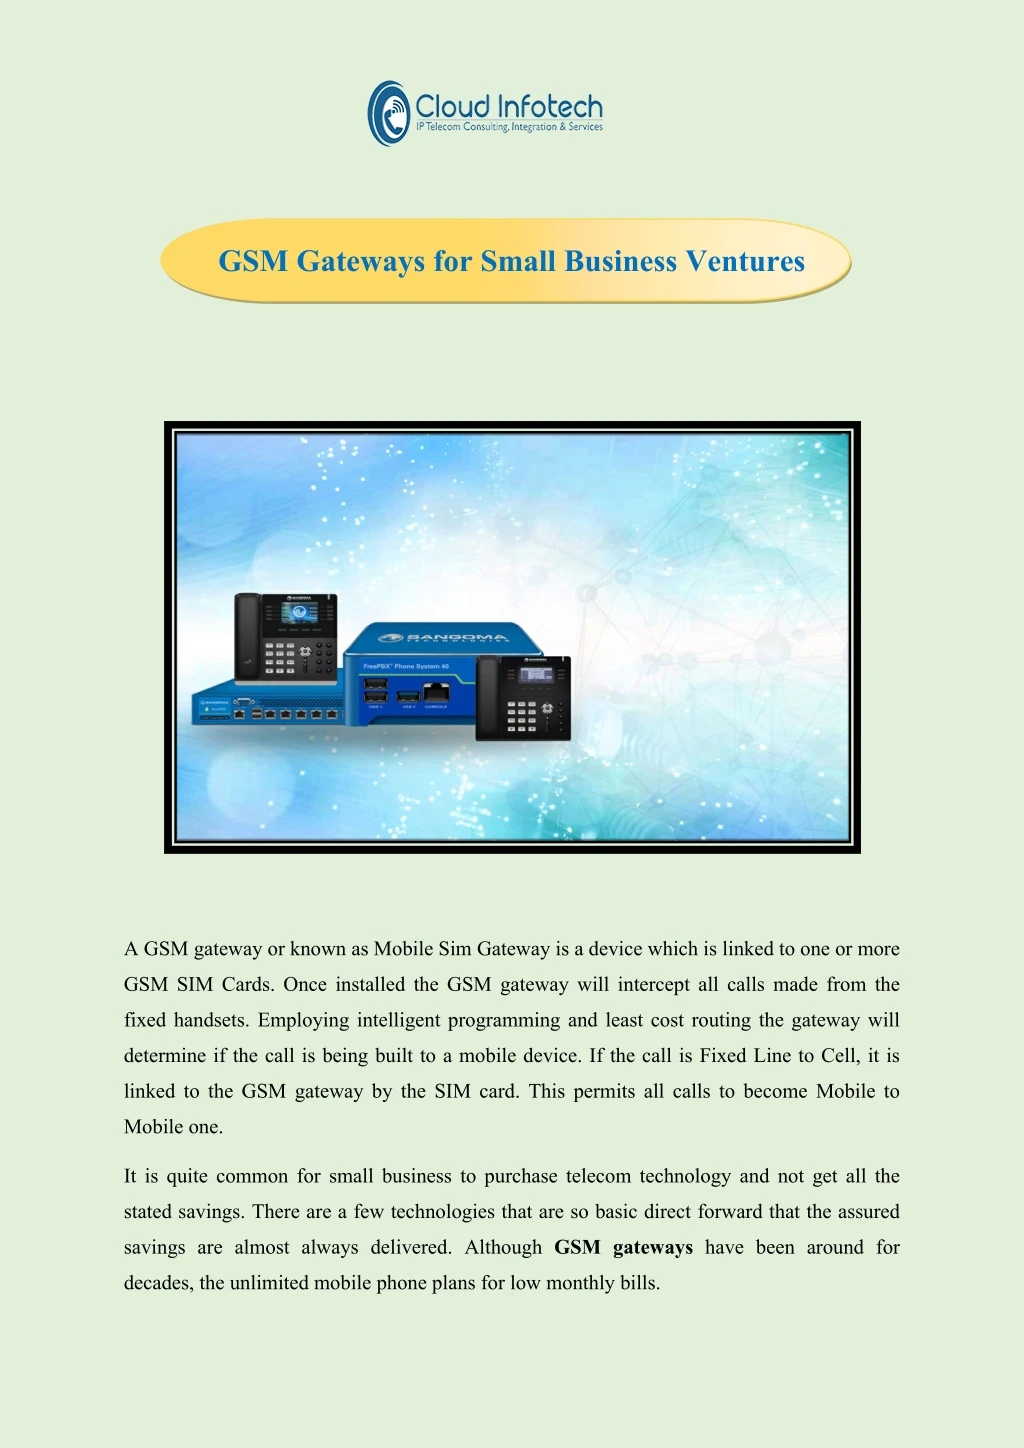 gsm gateways for small business ventures